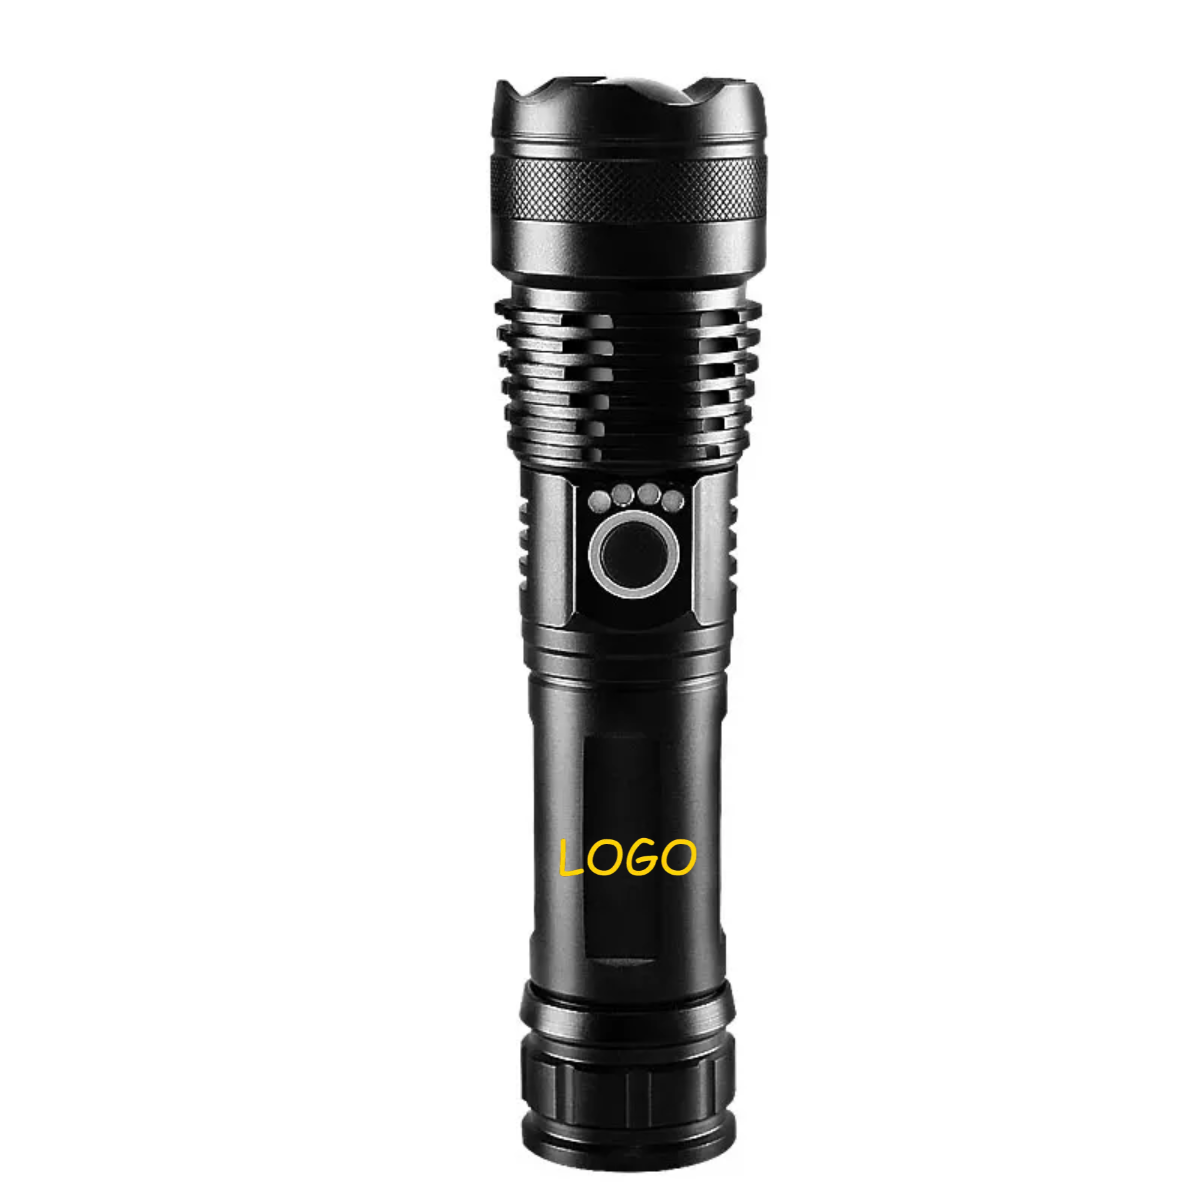 Rechargeable LED Water Resistant Camping Torches Adjustable Focus Zoom Tactical Flashlight